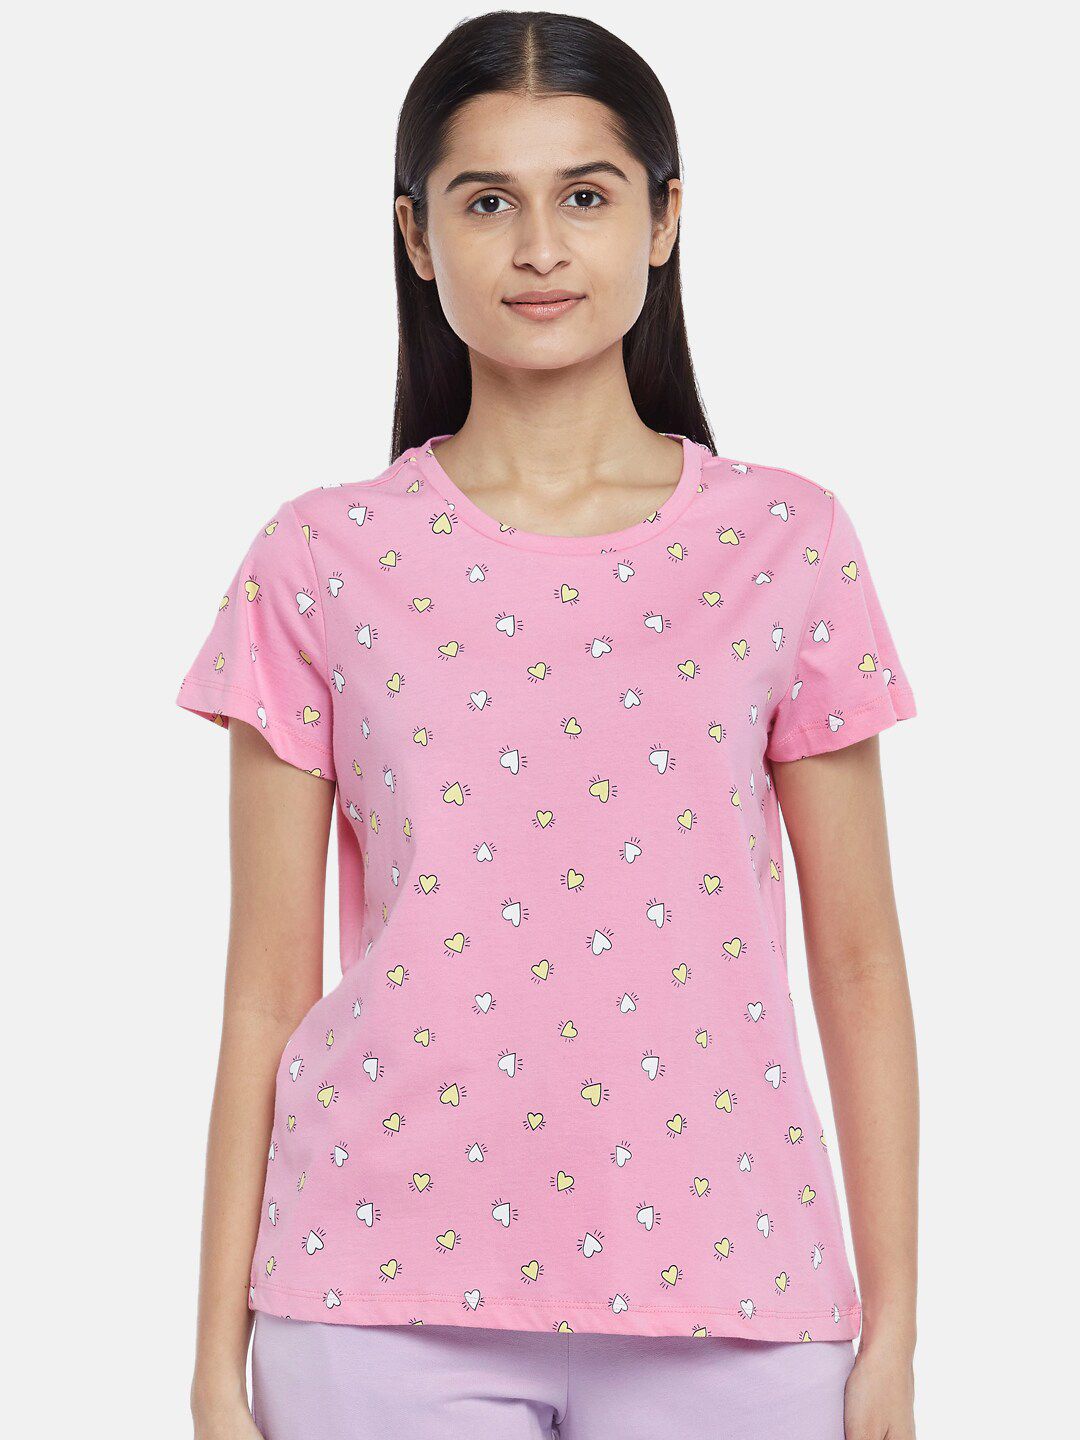 Dreamz by Pantaloons Women Pink & White Printed Pure Cotton Lounge T-shirt Price in India